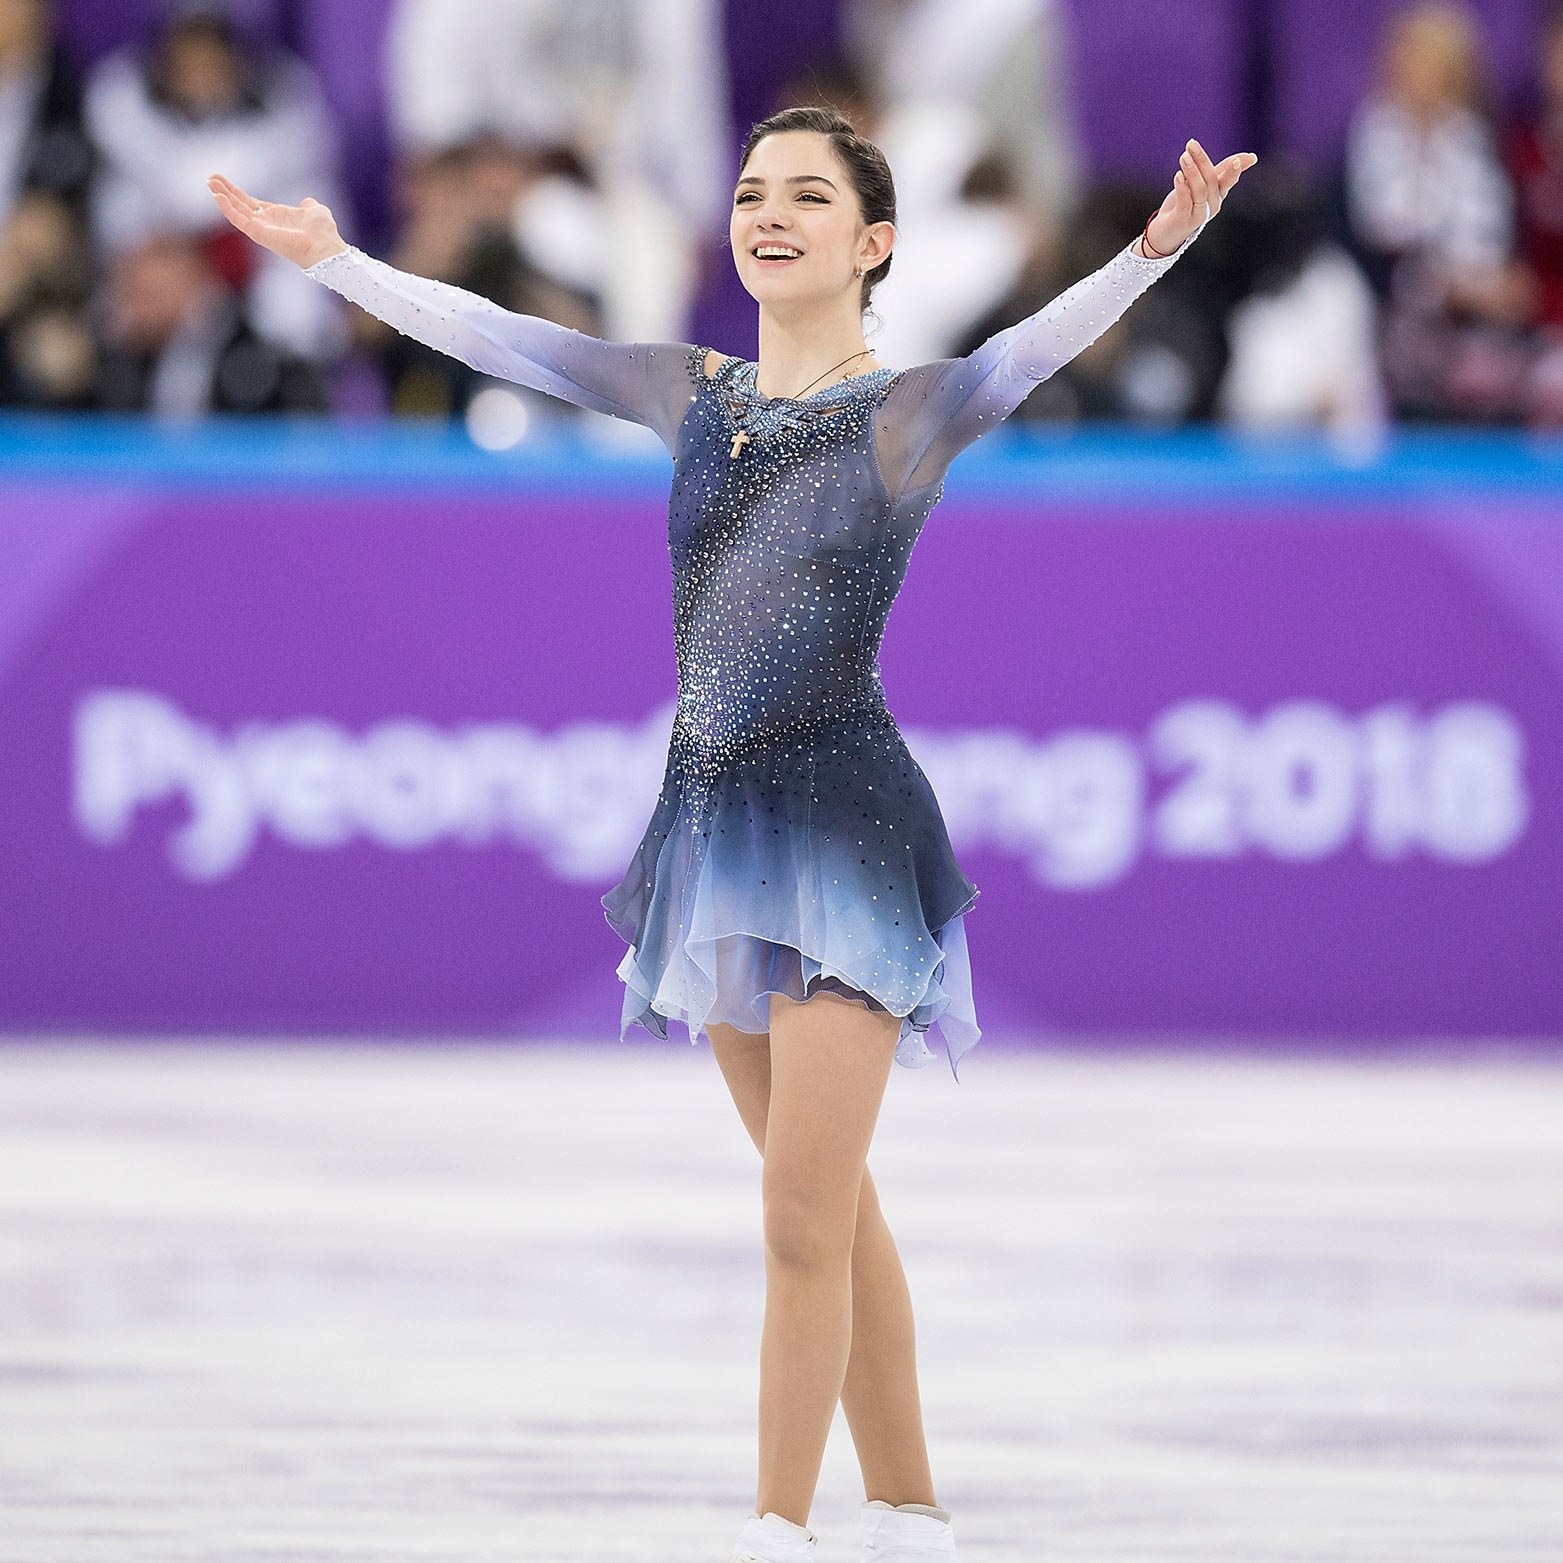 Olympics 2018: What You Need to Know Before Watching Women's Figure ...